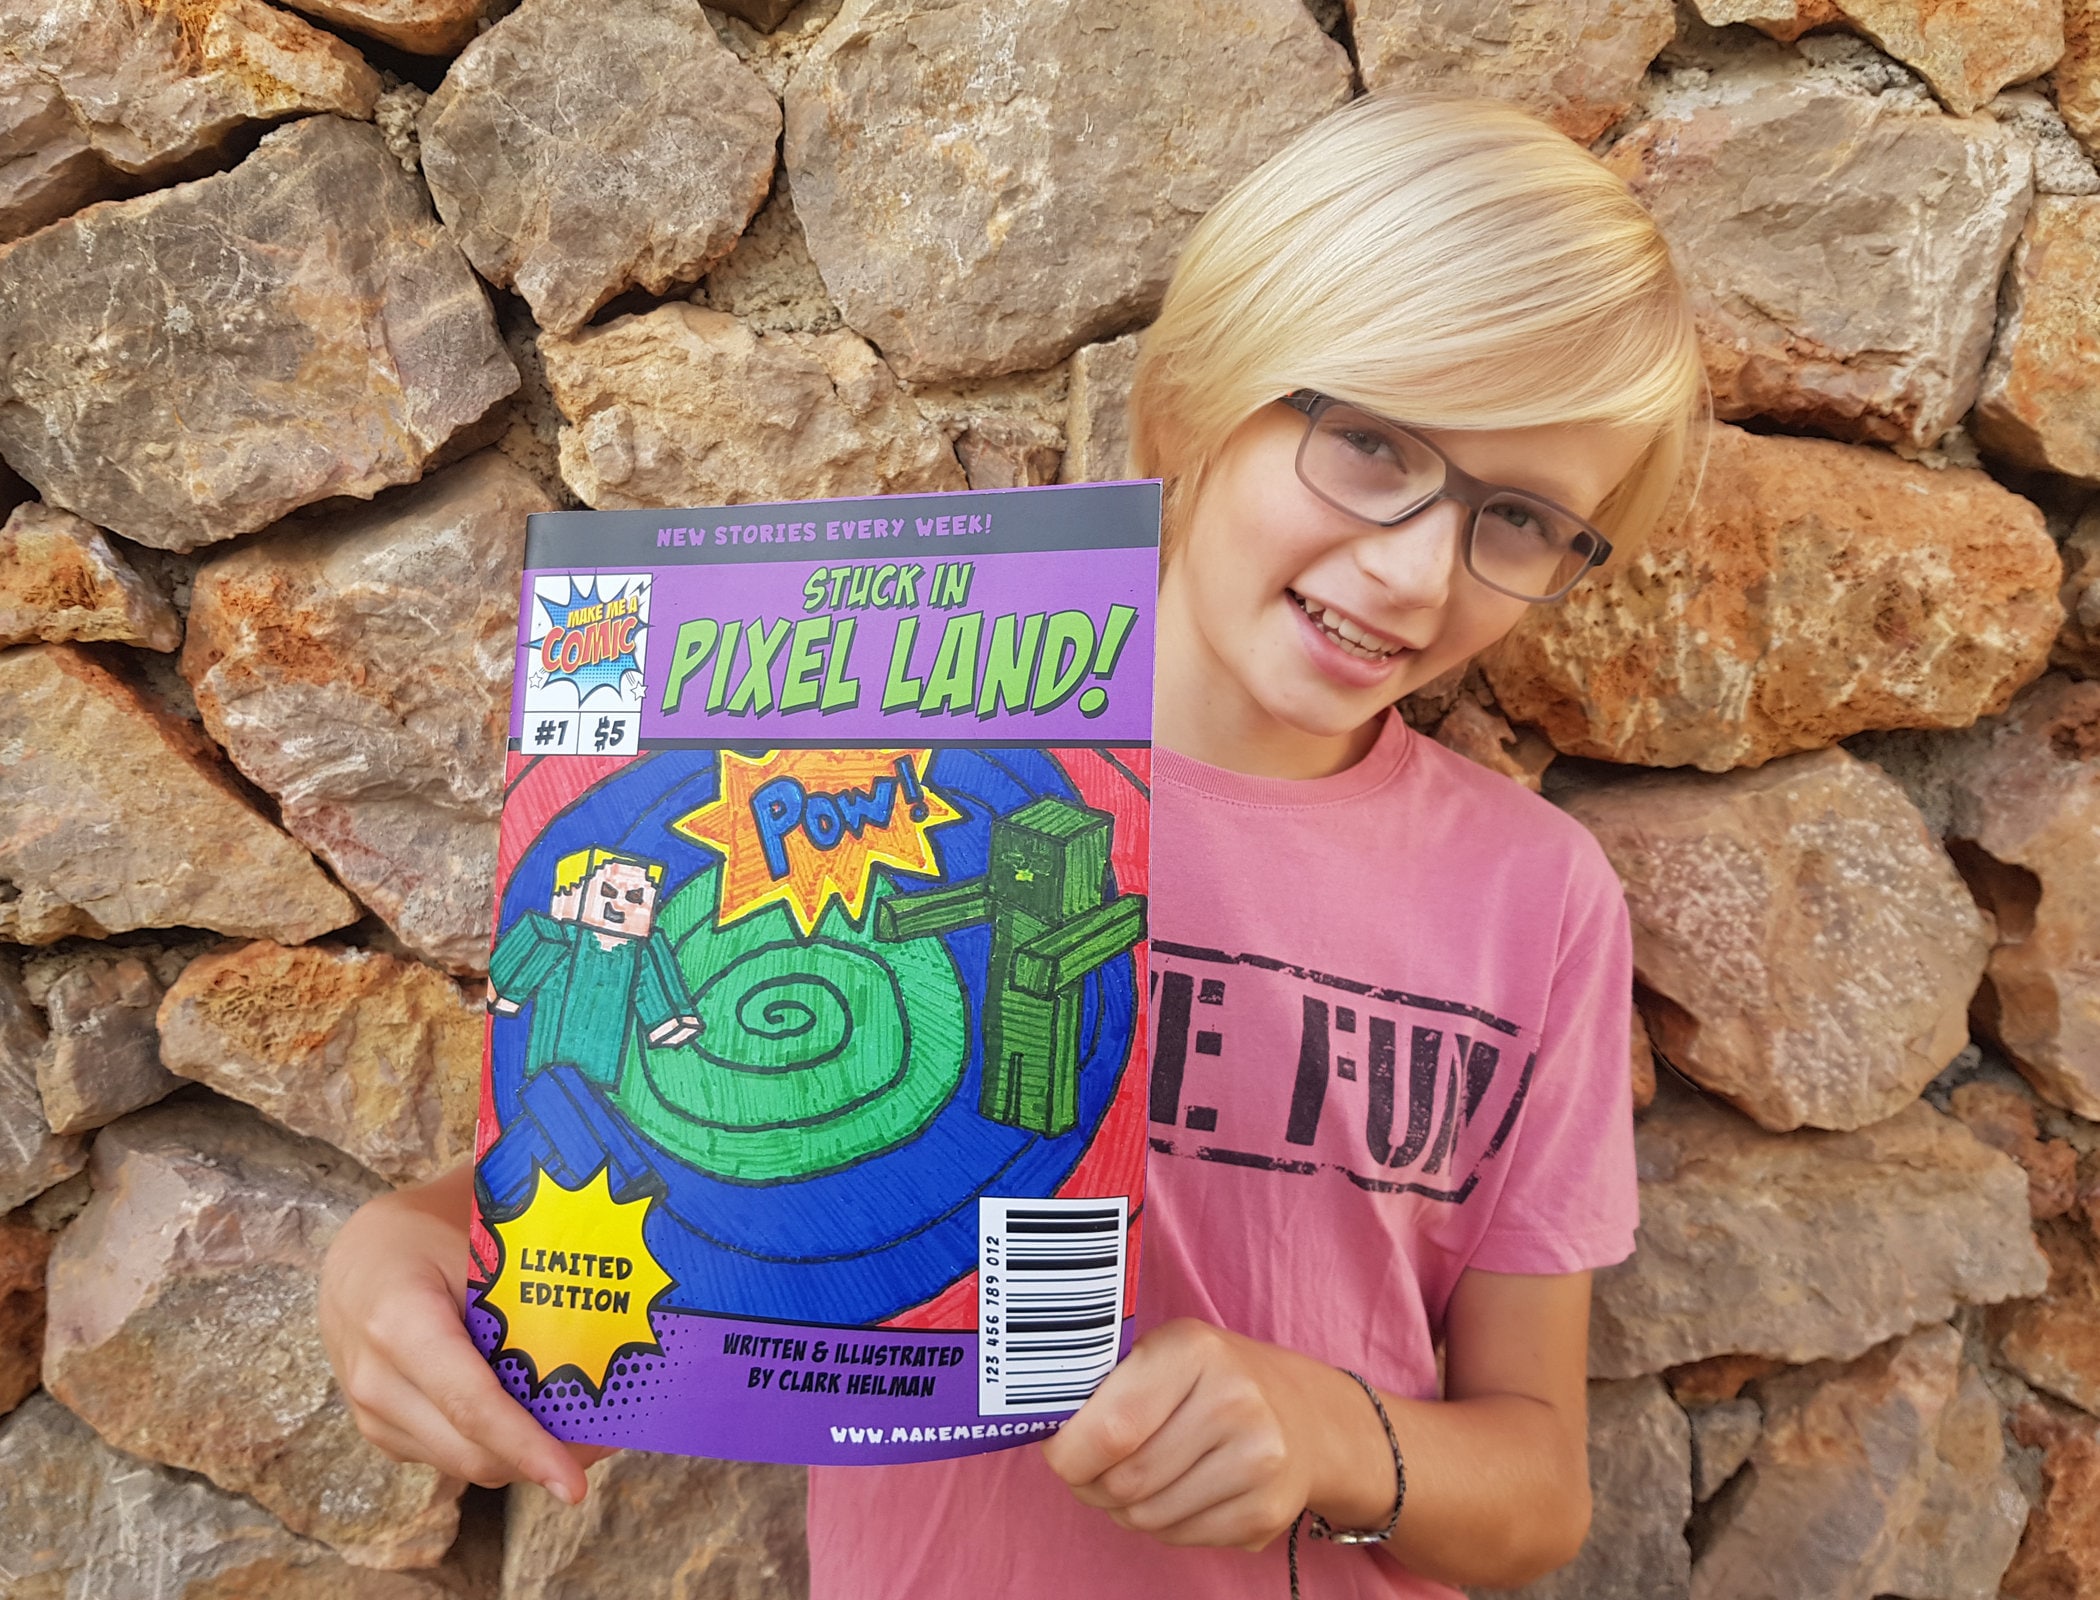 Penny Lane Emporium - 14 DAYS 'TIL: COMIC BOOK KIT. Have a kid in your life  that loves comics? Looking for a gift that requires creativity and thought?  This comic book kit @